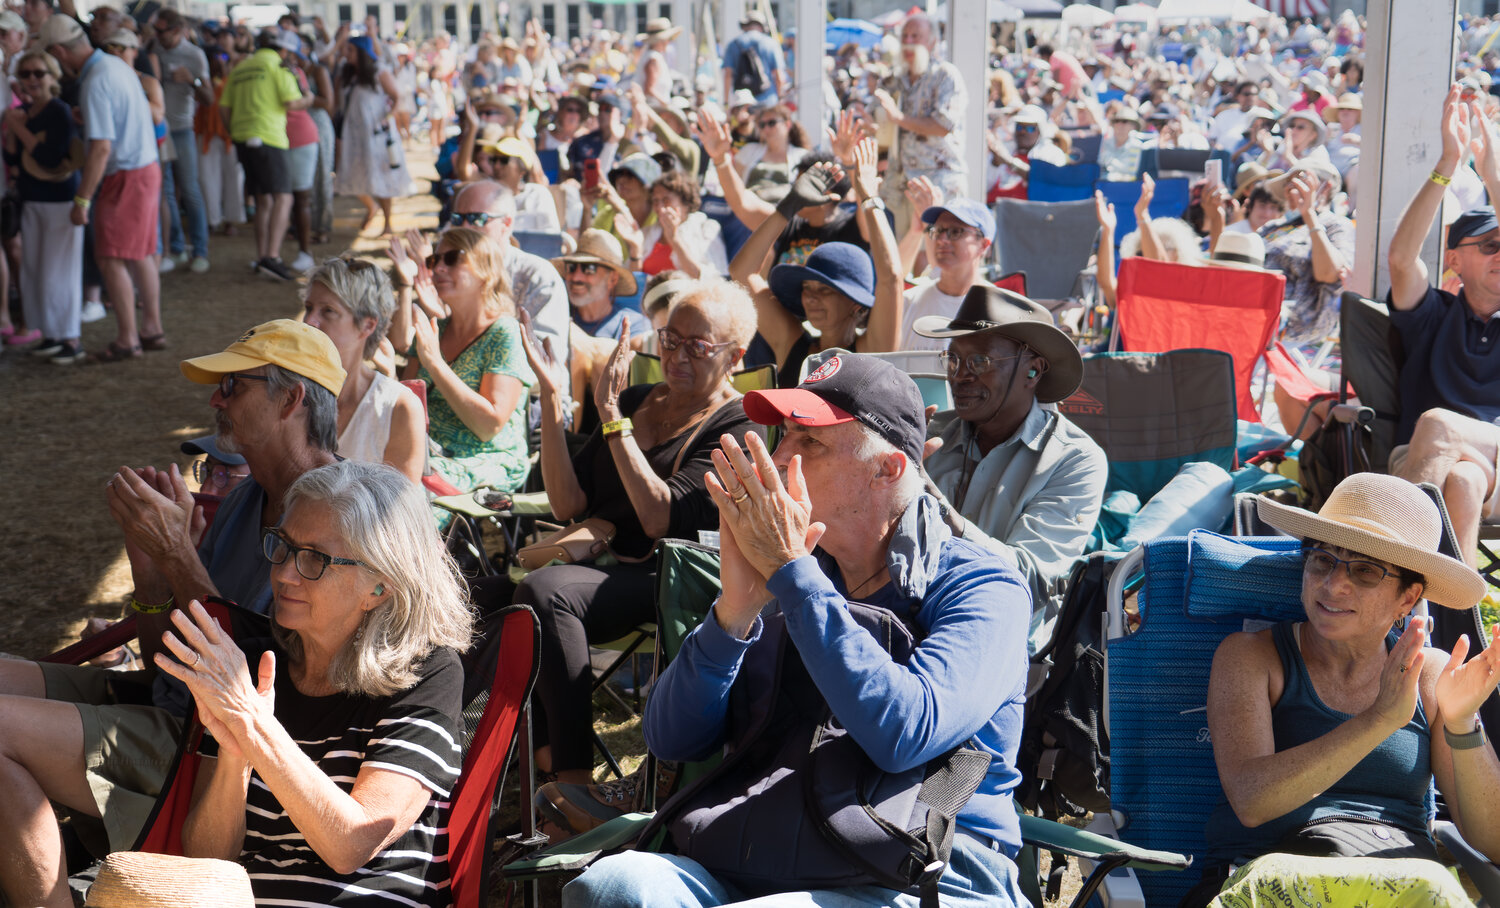 A large crowd cheers for Samara Joy after opening her set at the Newport Jazz Festival on Sunday, August 6. Samara has won multiple accolades in the jazz world including two GRAMMY Awards in 2023.